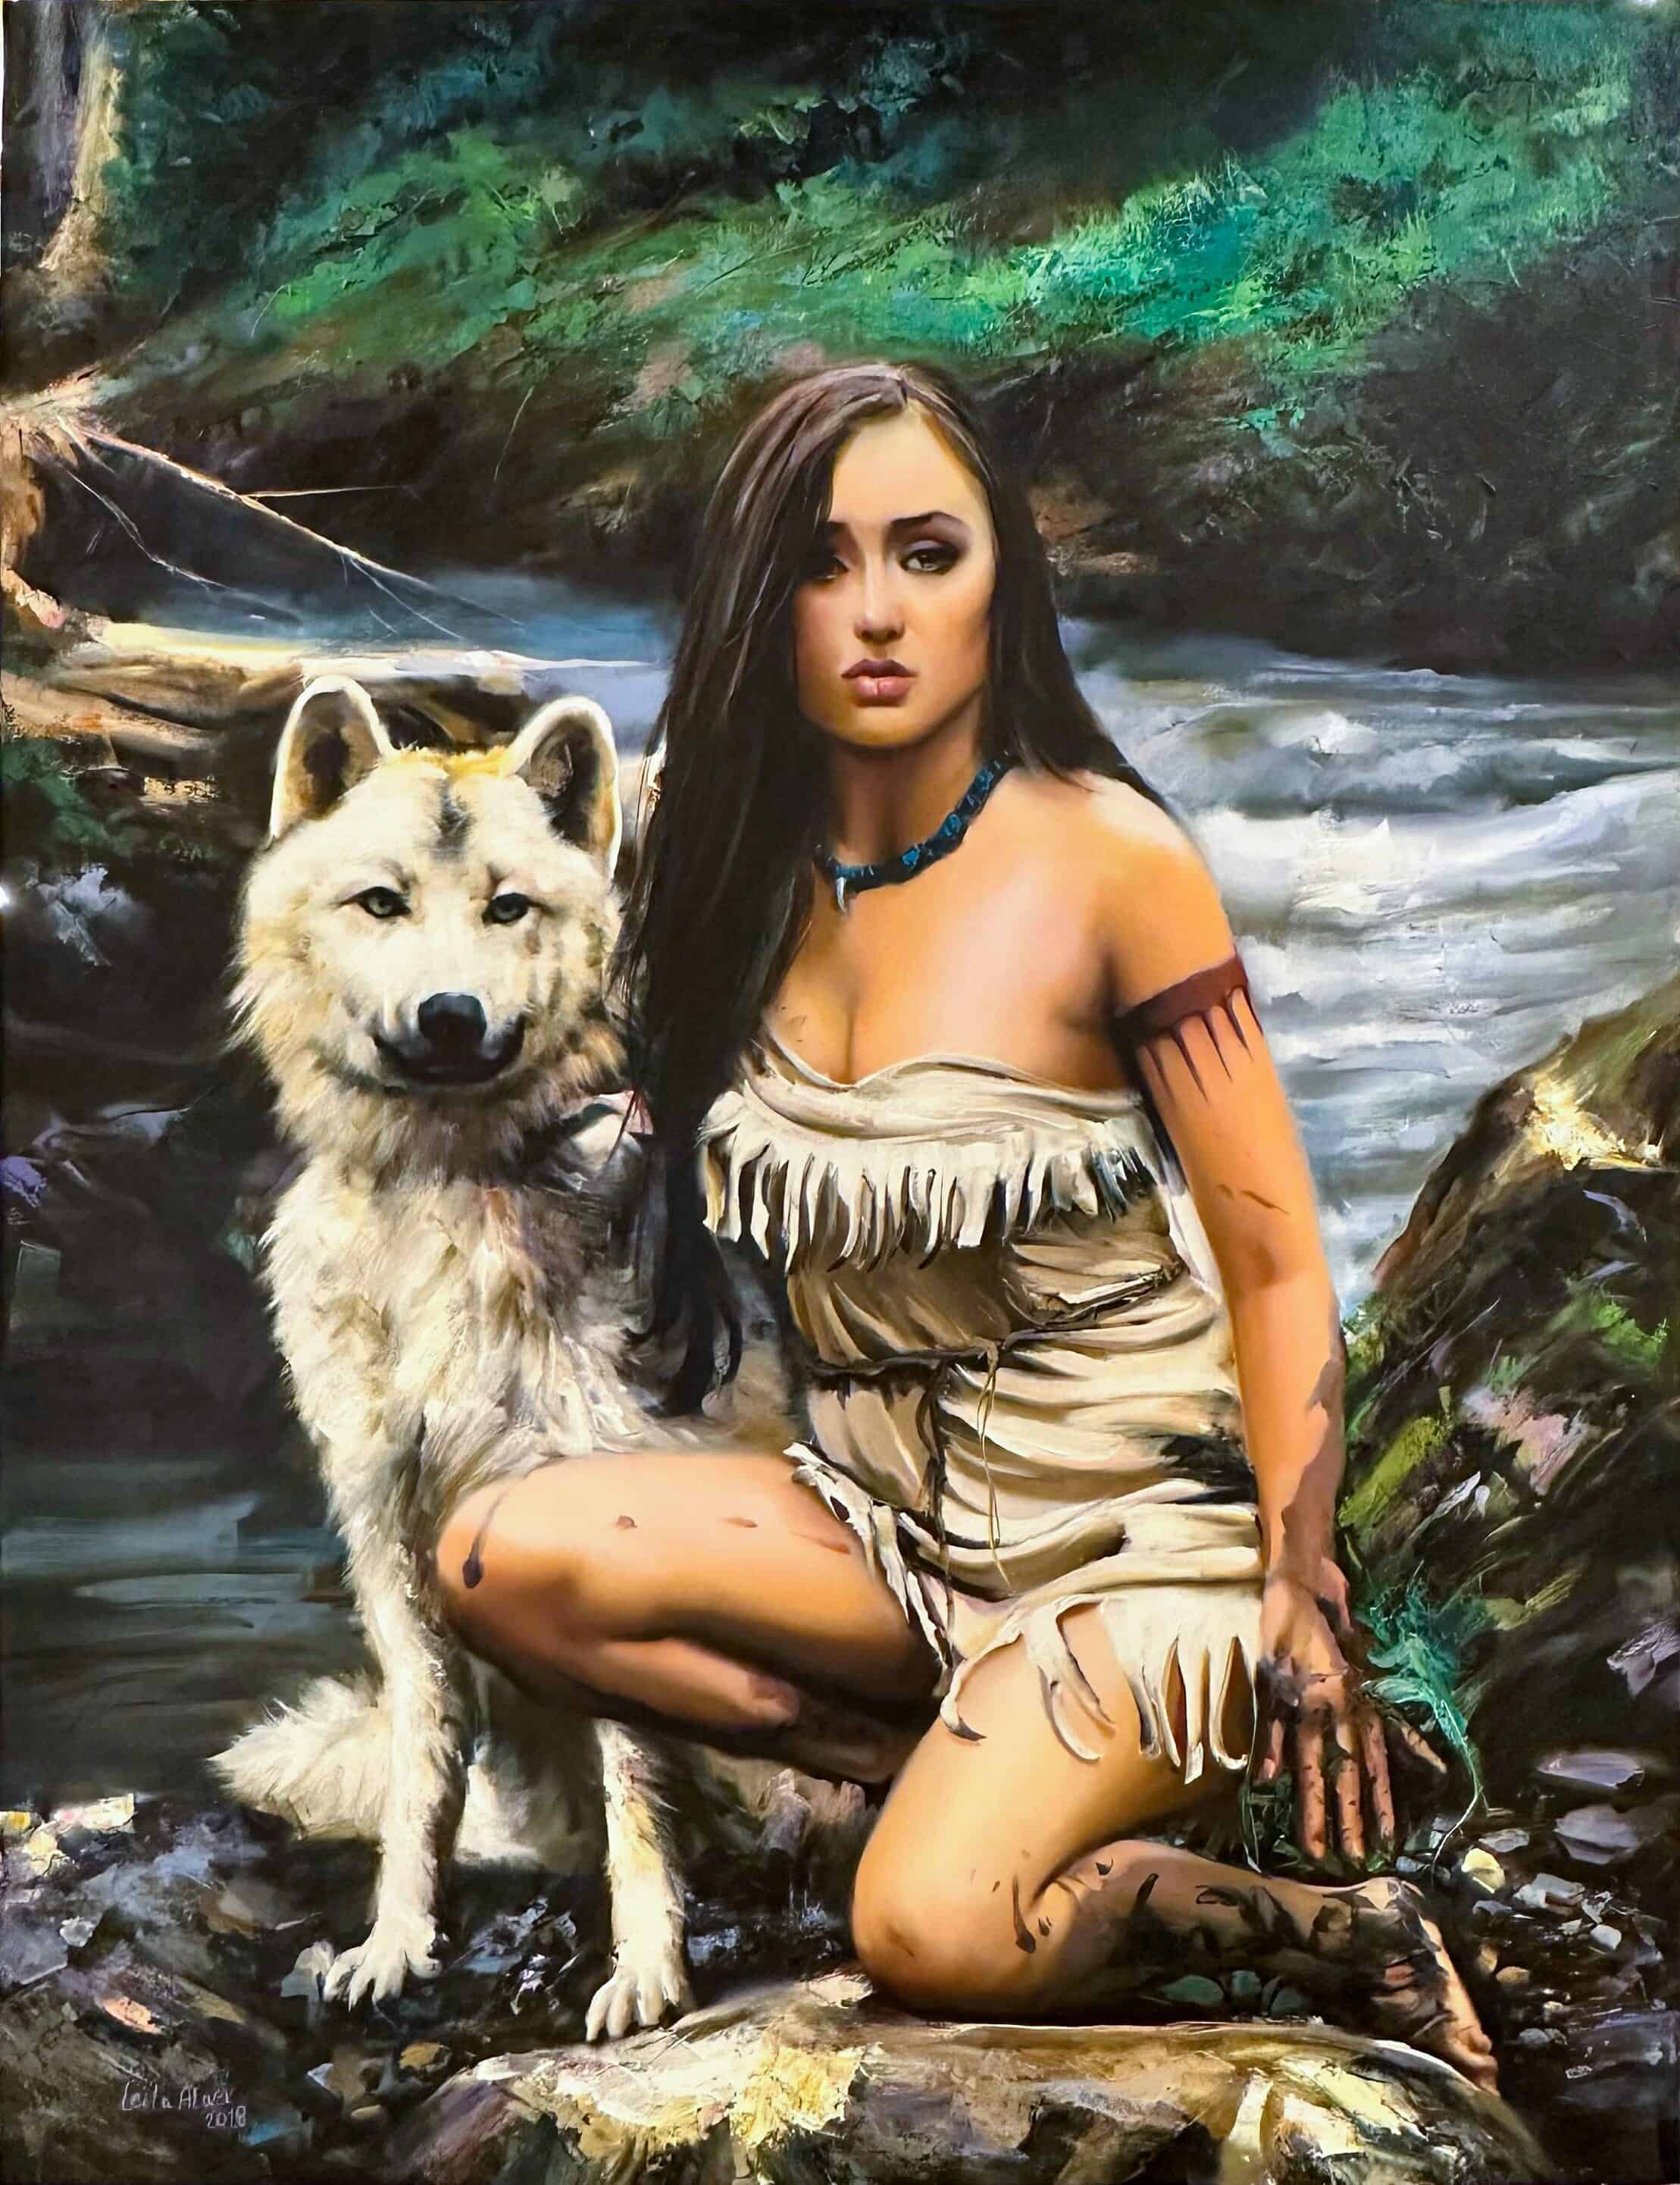 Contemporary Art. Title: The Warrior, Oil on Canvas, 51 x 40 in by Canadian Artist Leila Alaei.